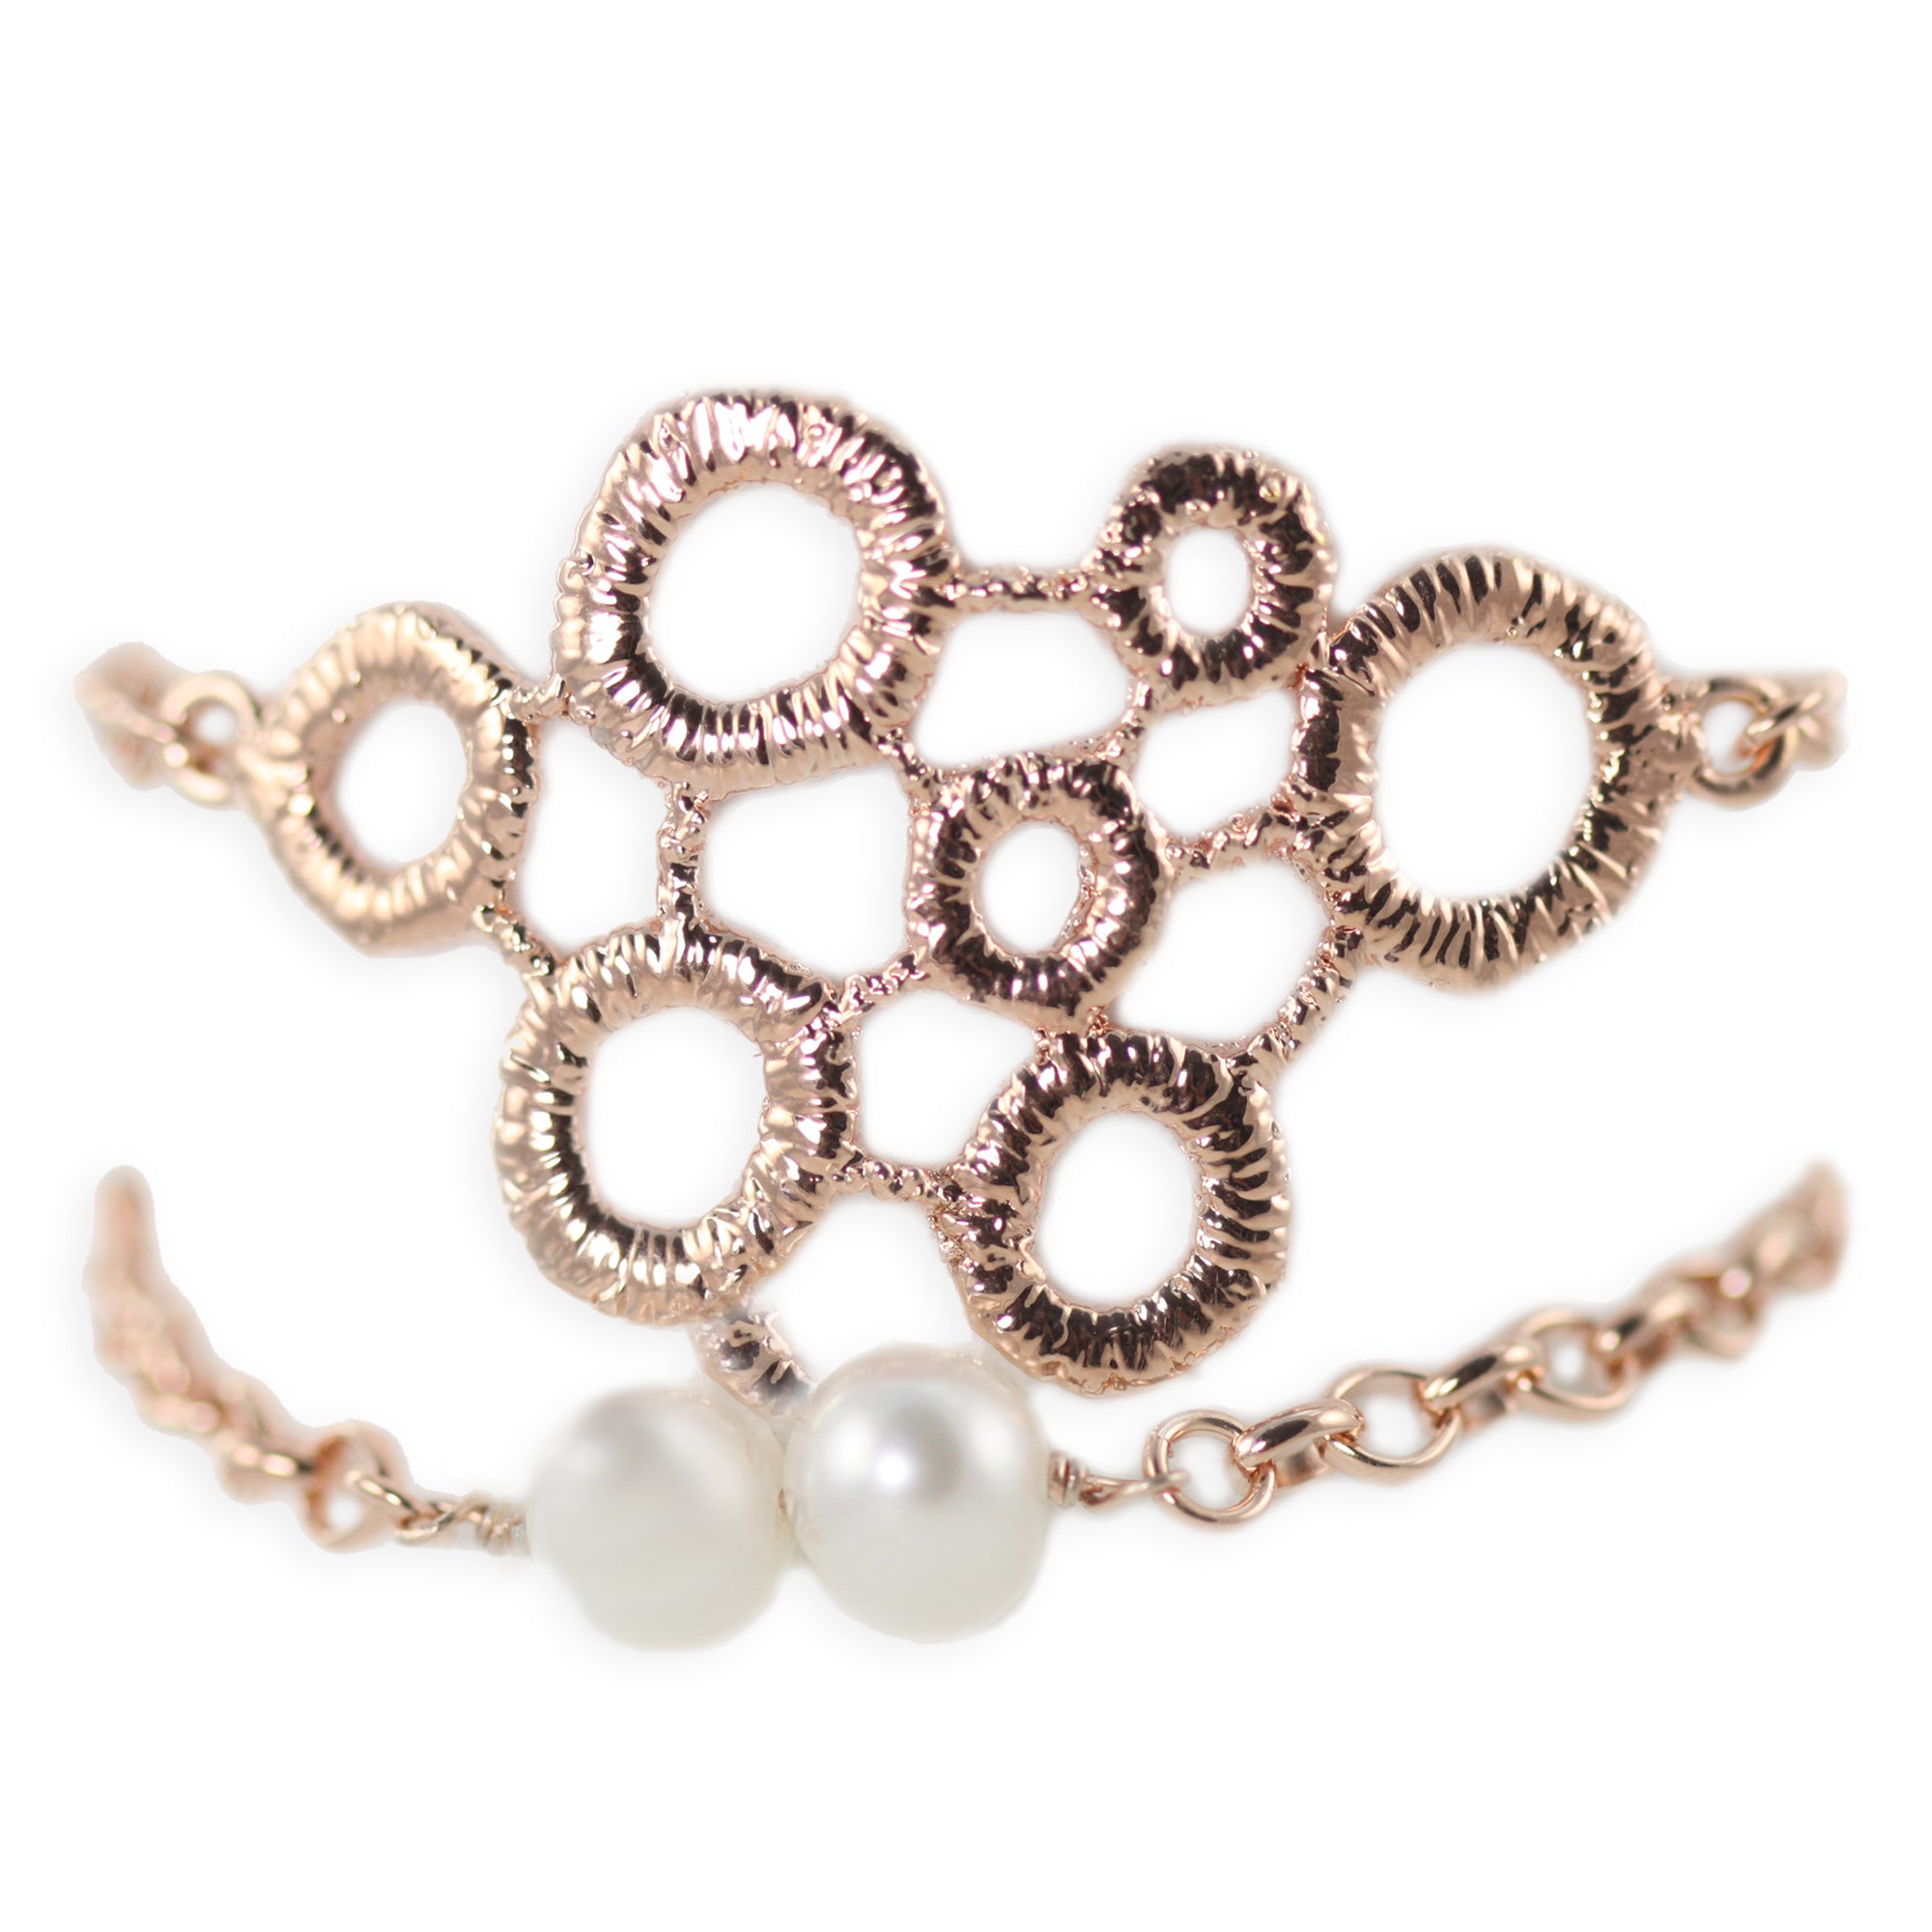 Exquisite chain bracelet with two pearls and a circular lace front dipped in rose gold.